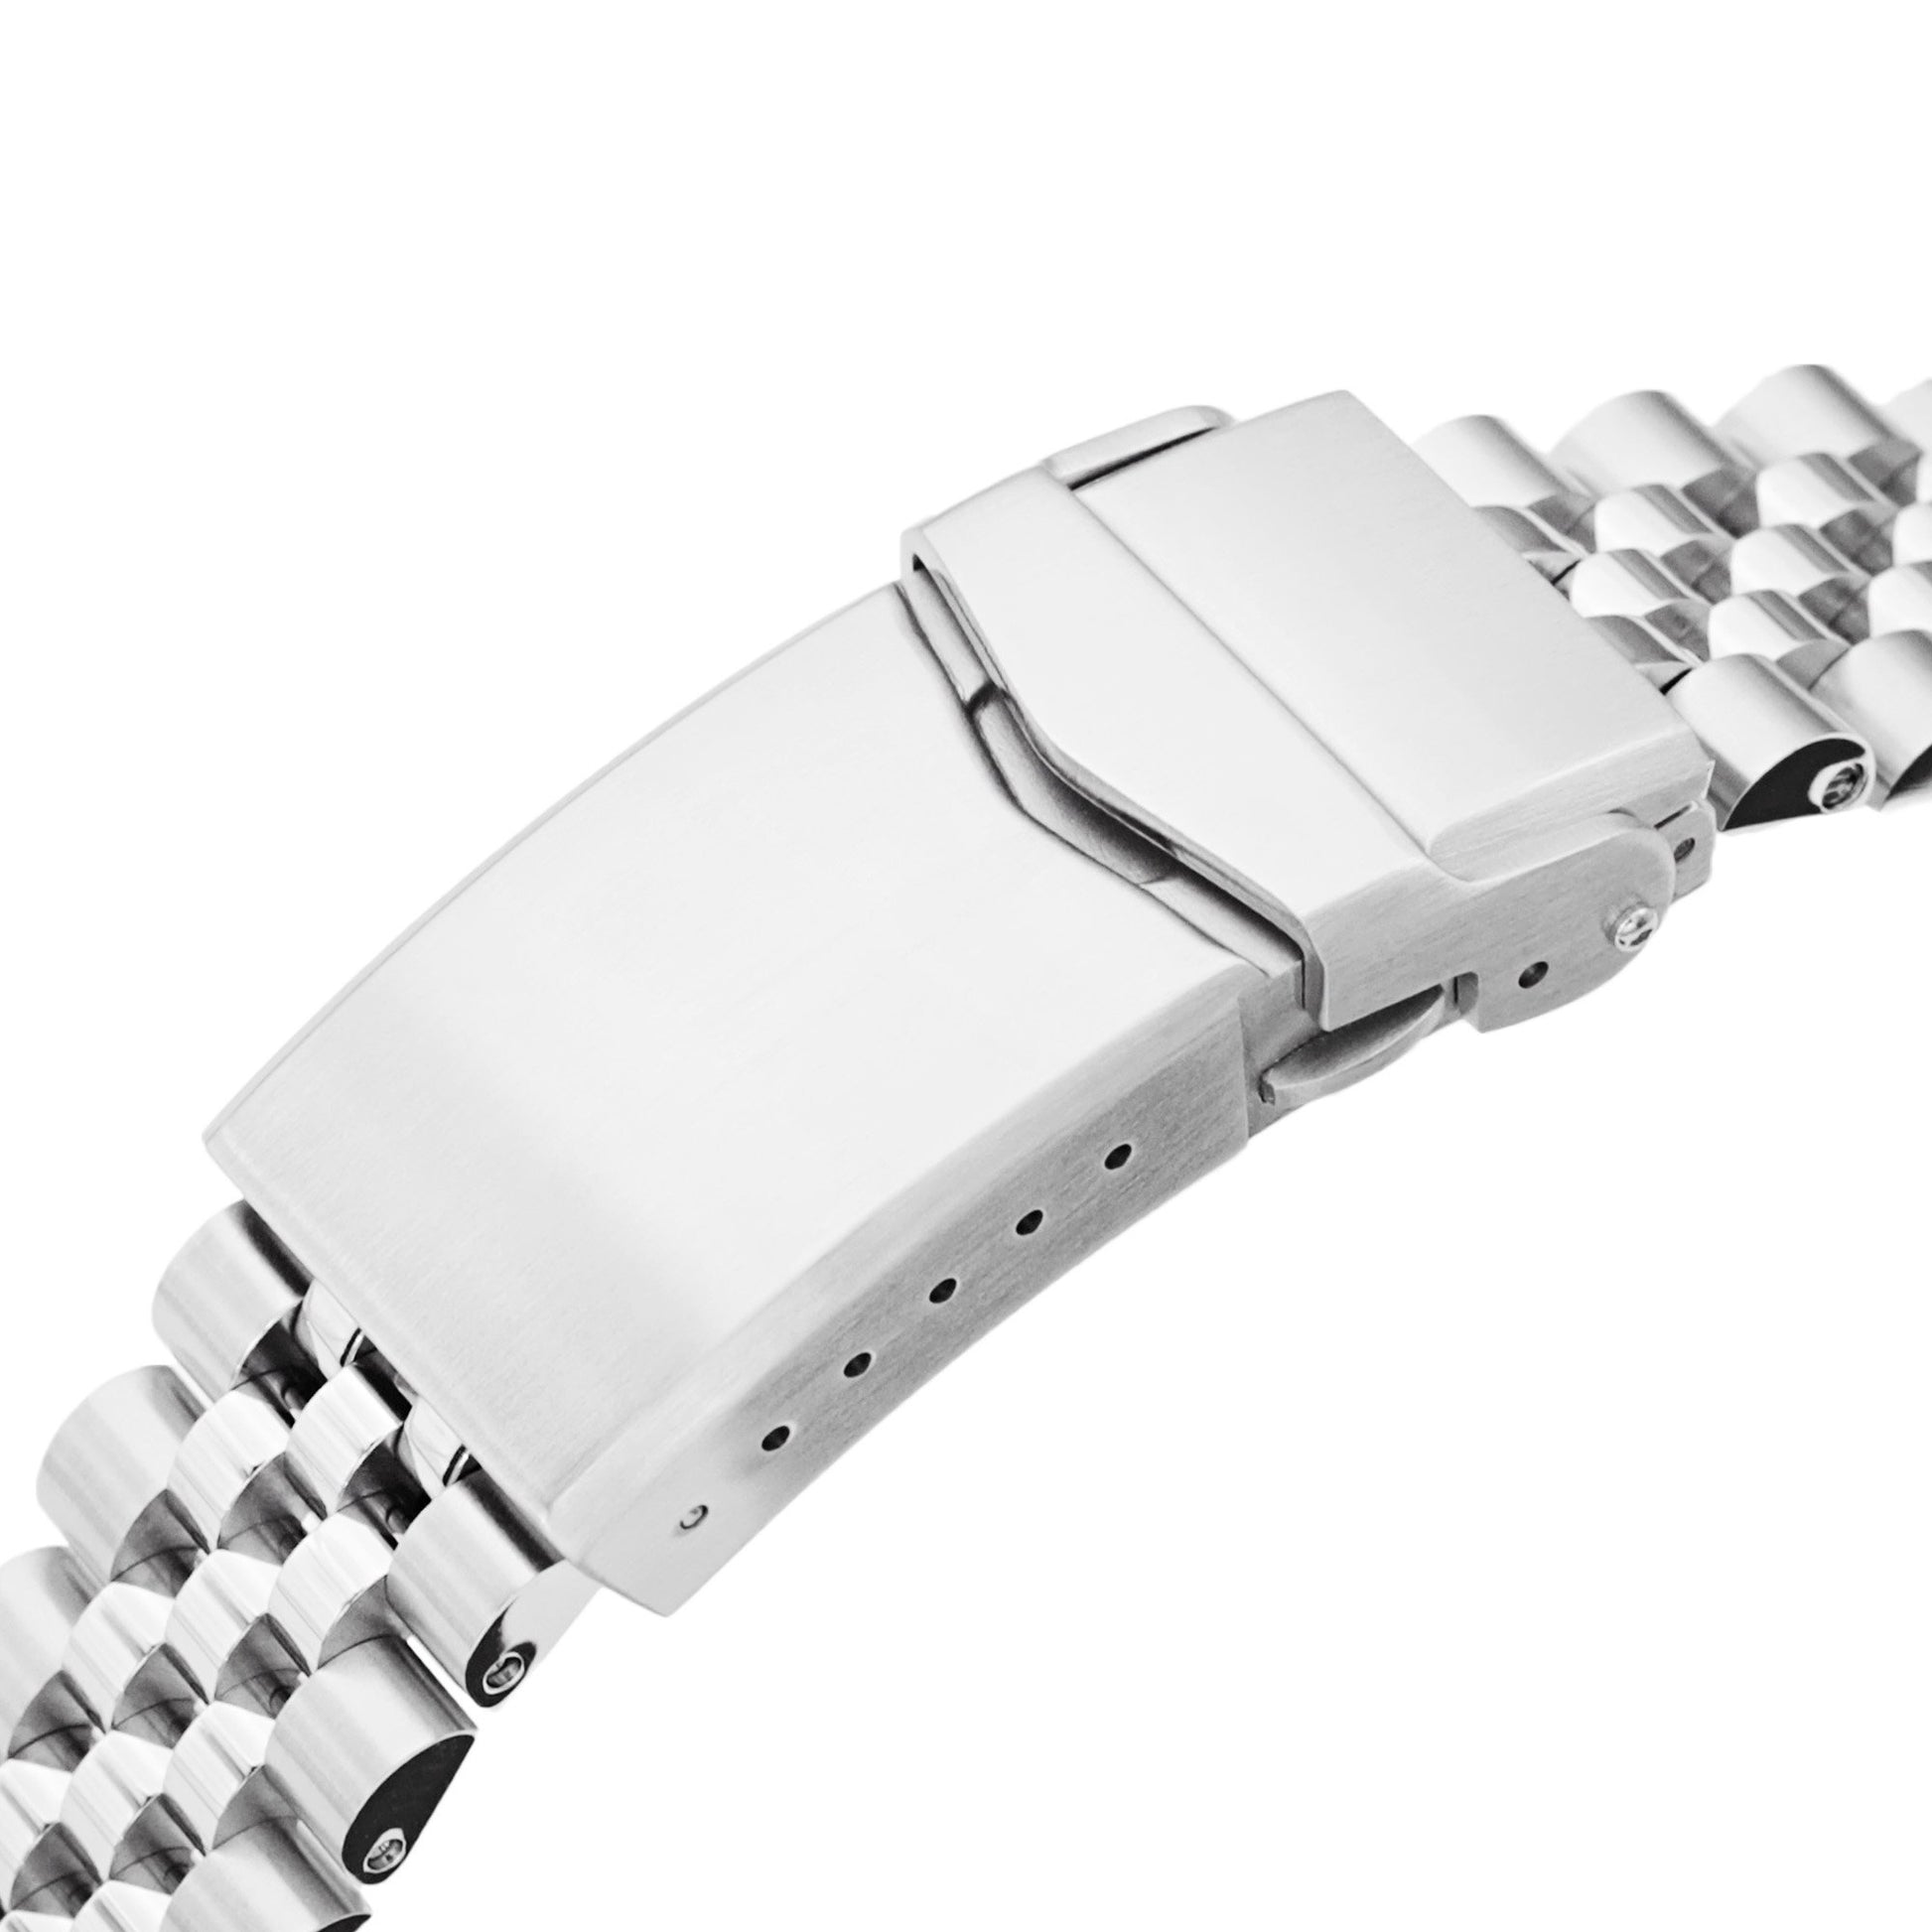 20mm Super-JUB II Watch Band for Seiko Alpinist SARB017, 316L Stainless Steel Brushed V-Clasp